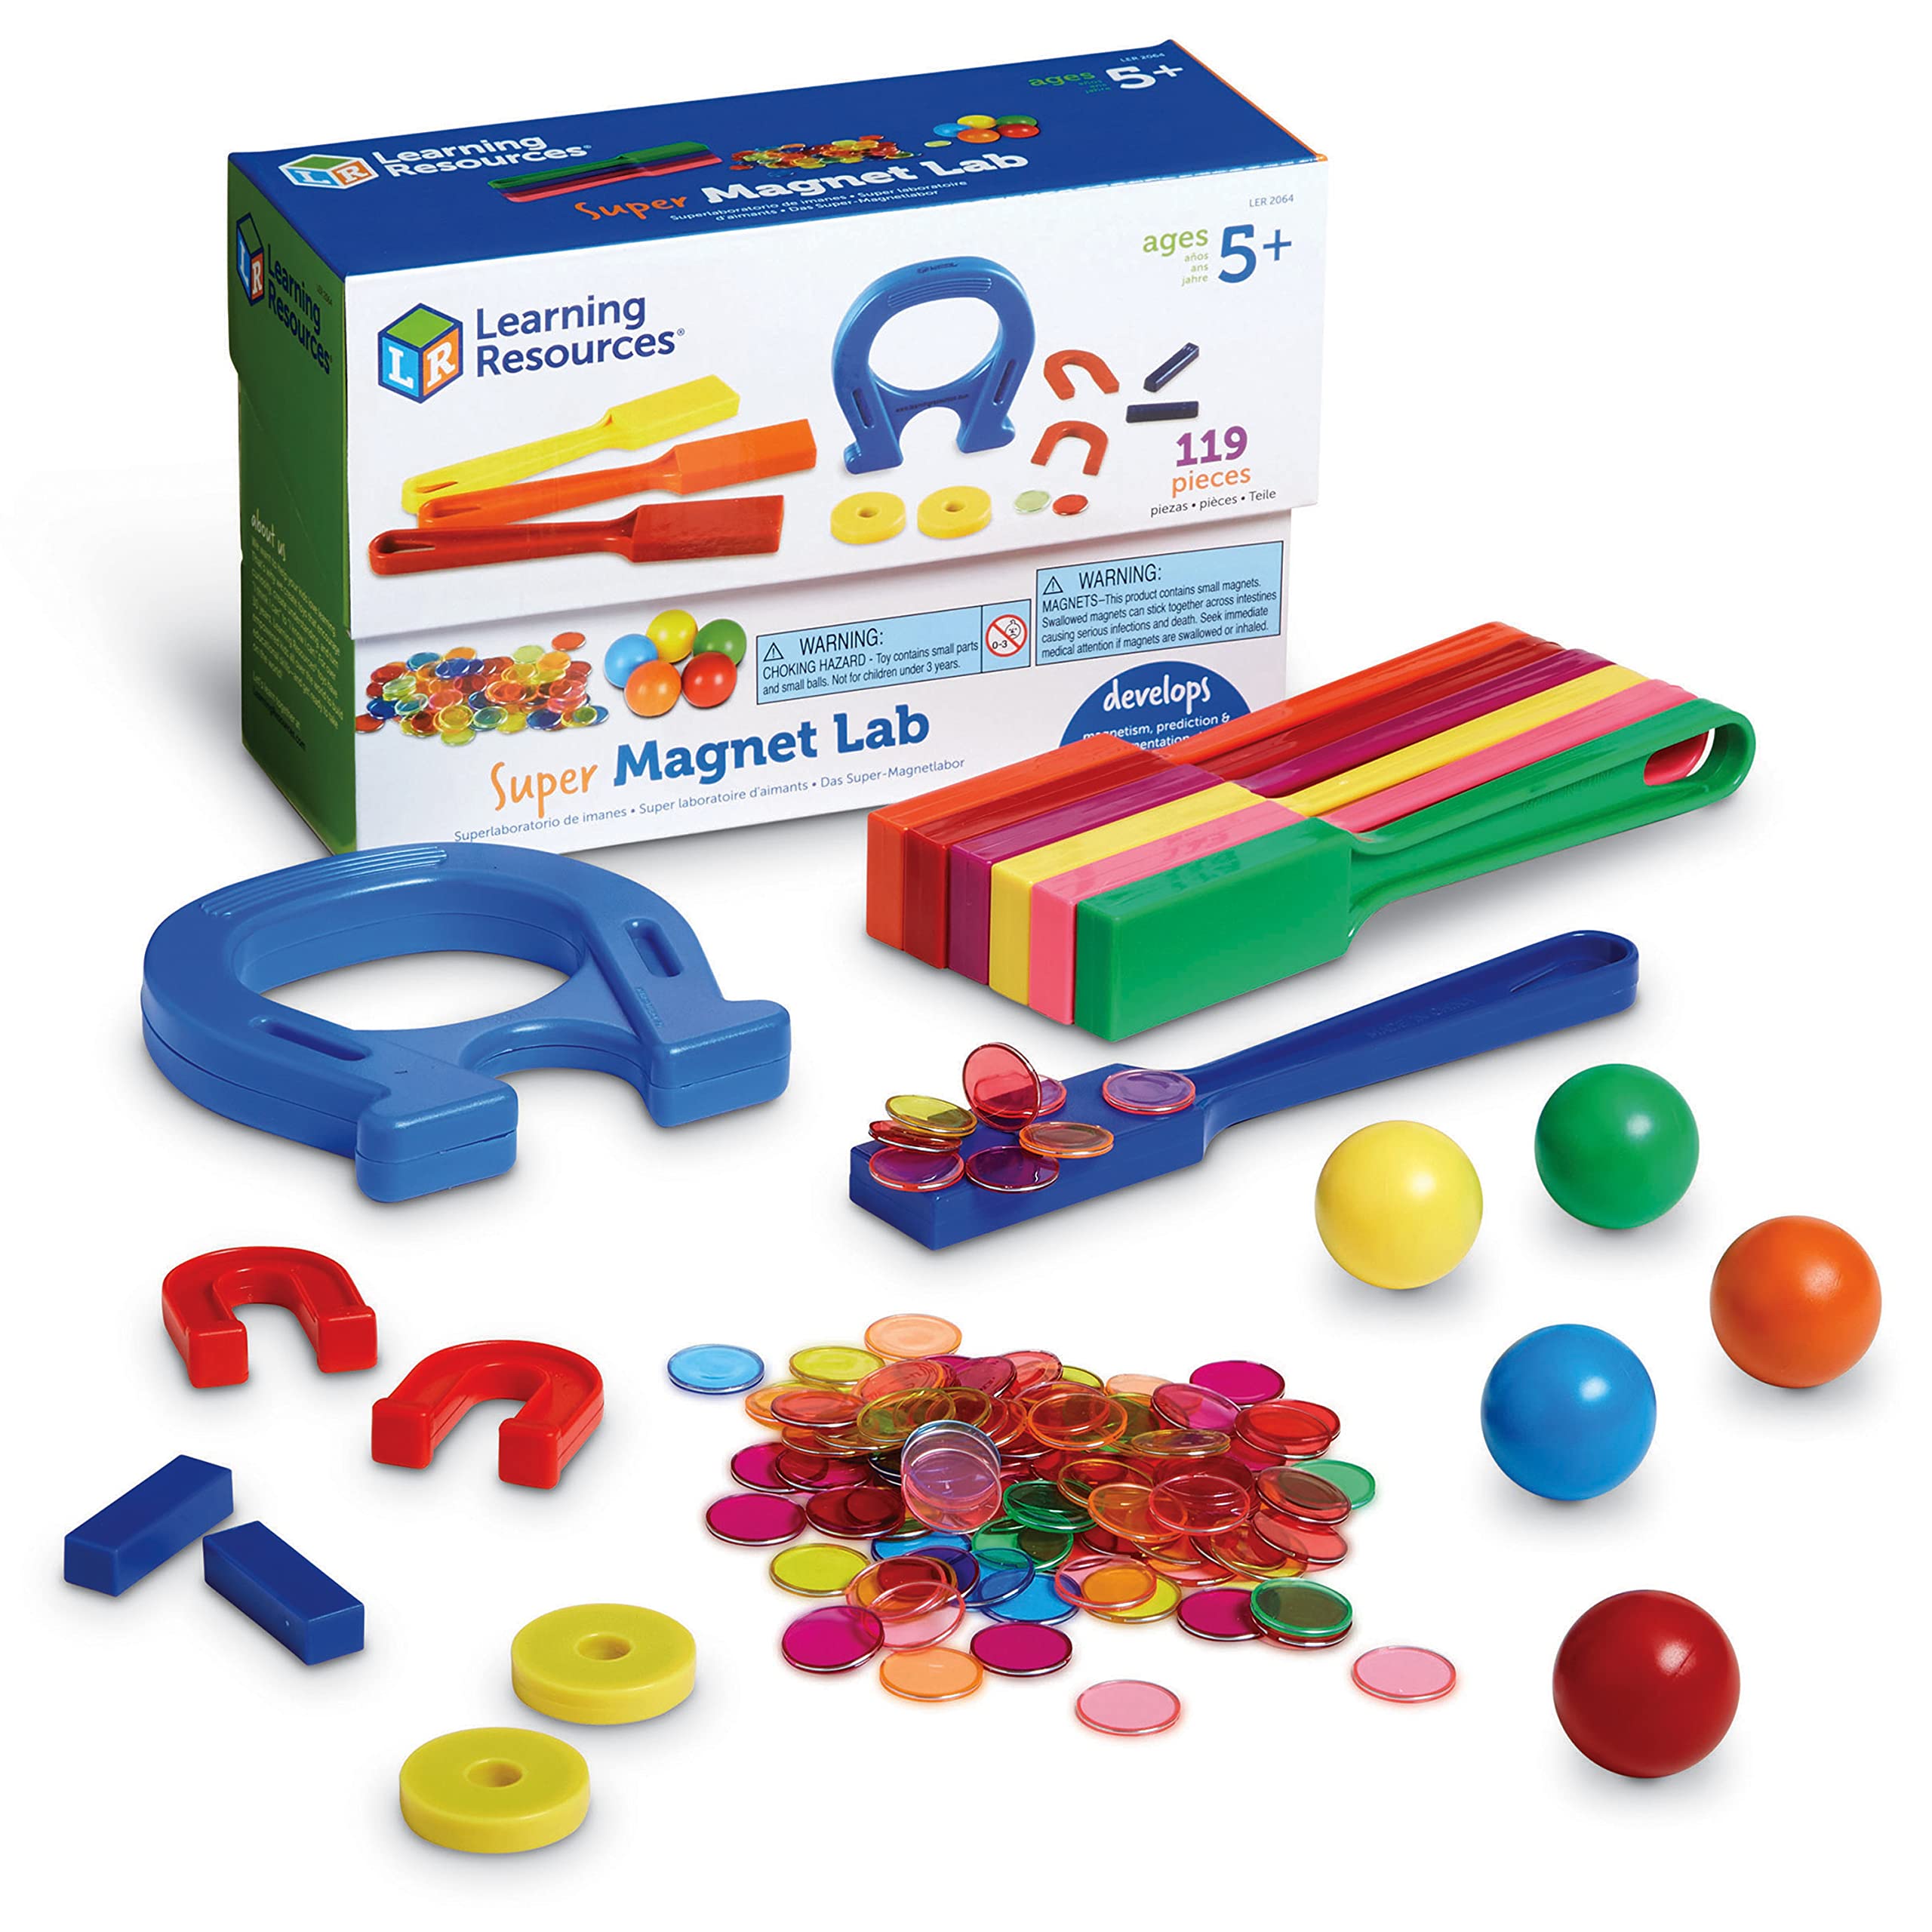 Learning Resources Super Magnet-Experimentierset